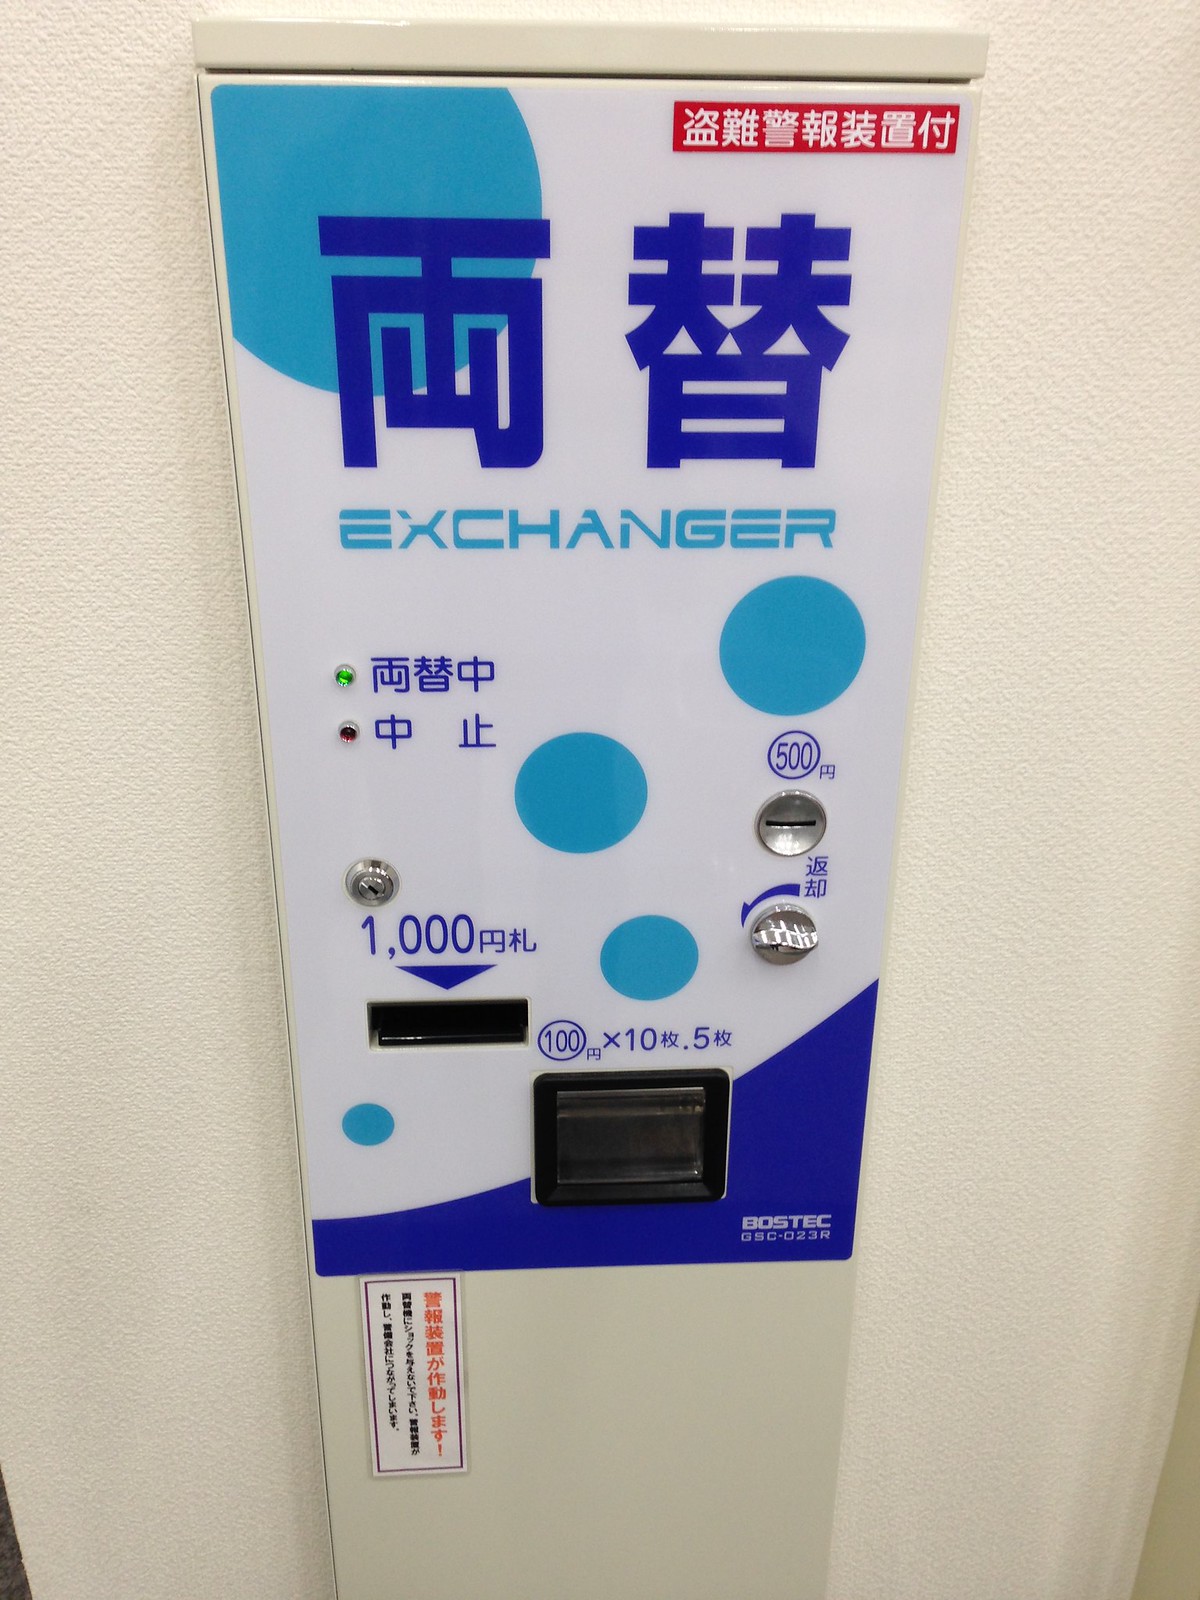 A coin laundry in Japan with a coin dispenser. Require change? No problem